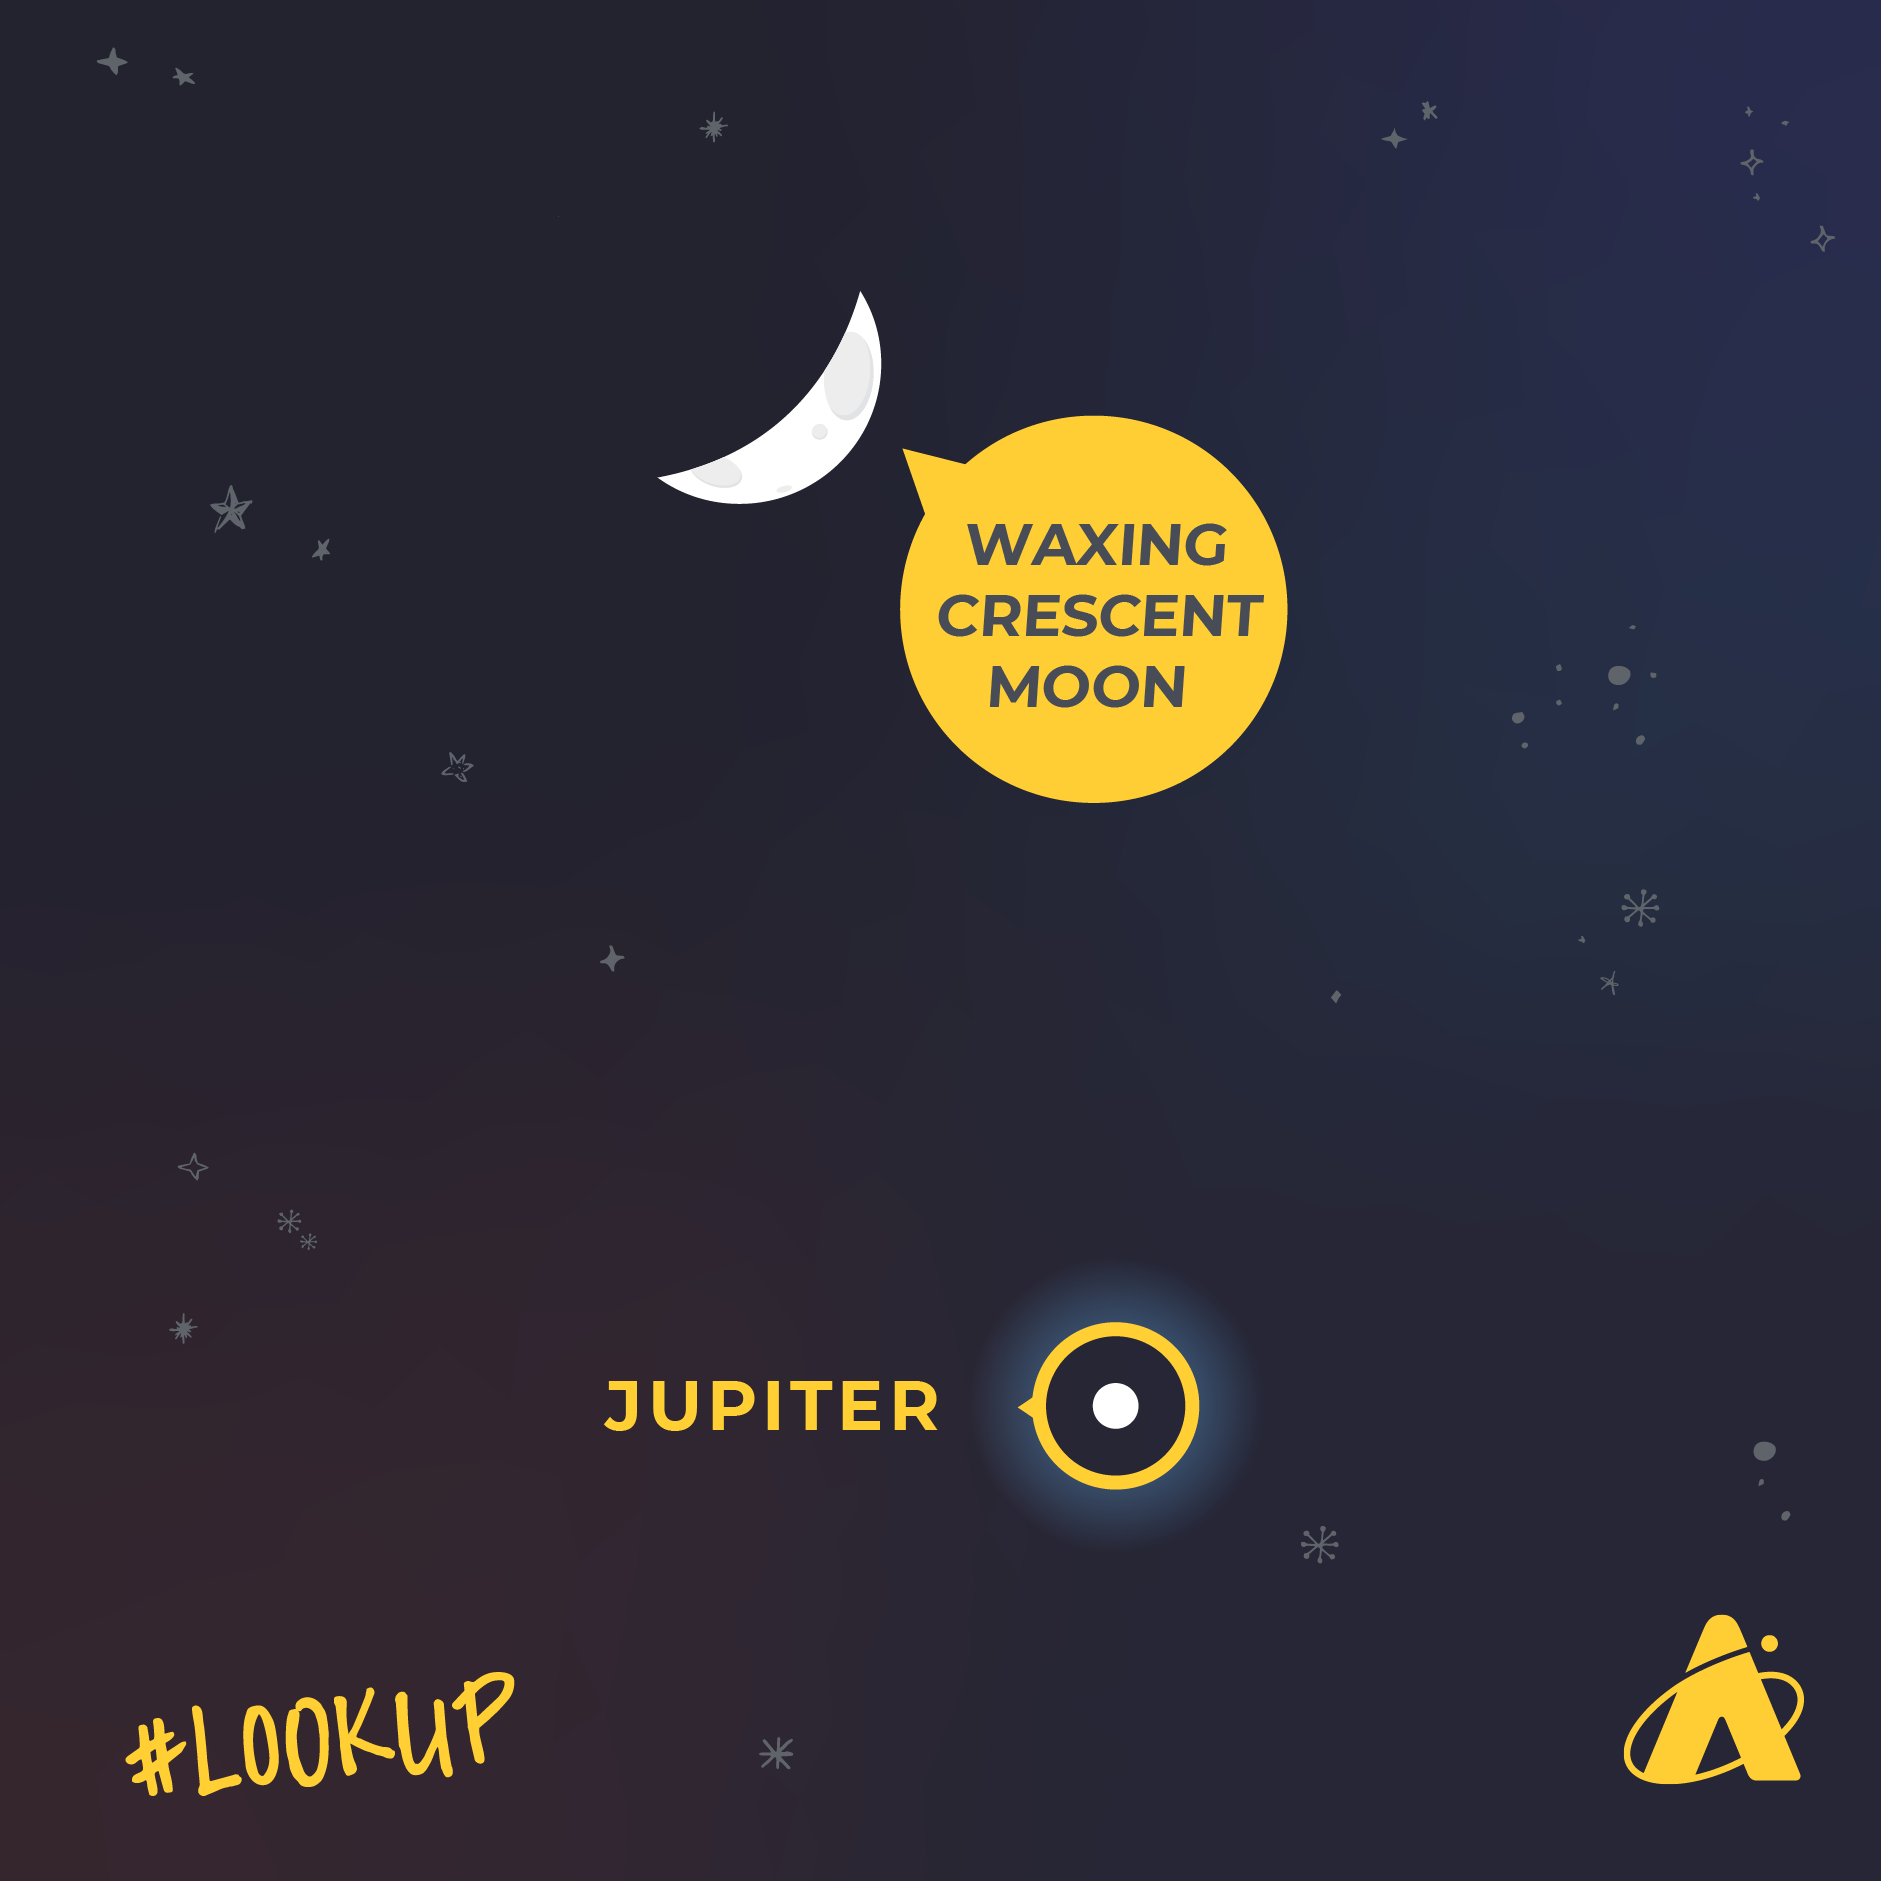  Adler Planetarium infographic depicting the close proximity of the planet Jupiter and a waxing crescent Moon in the sky on the evening of February 15, 2024.